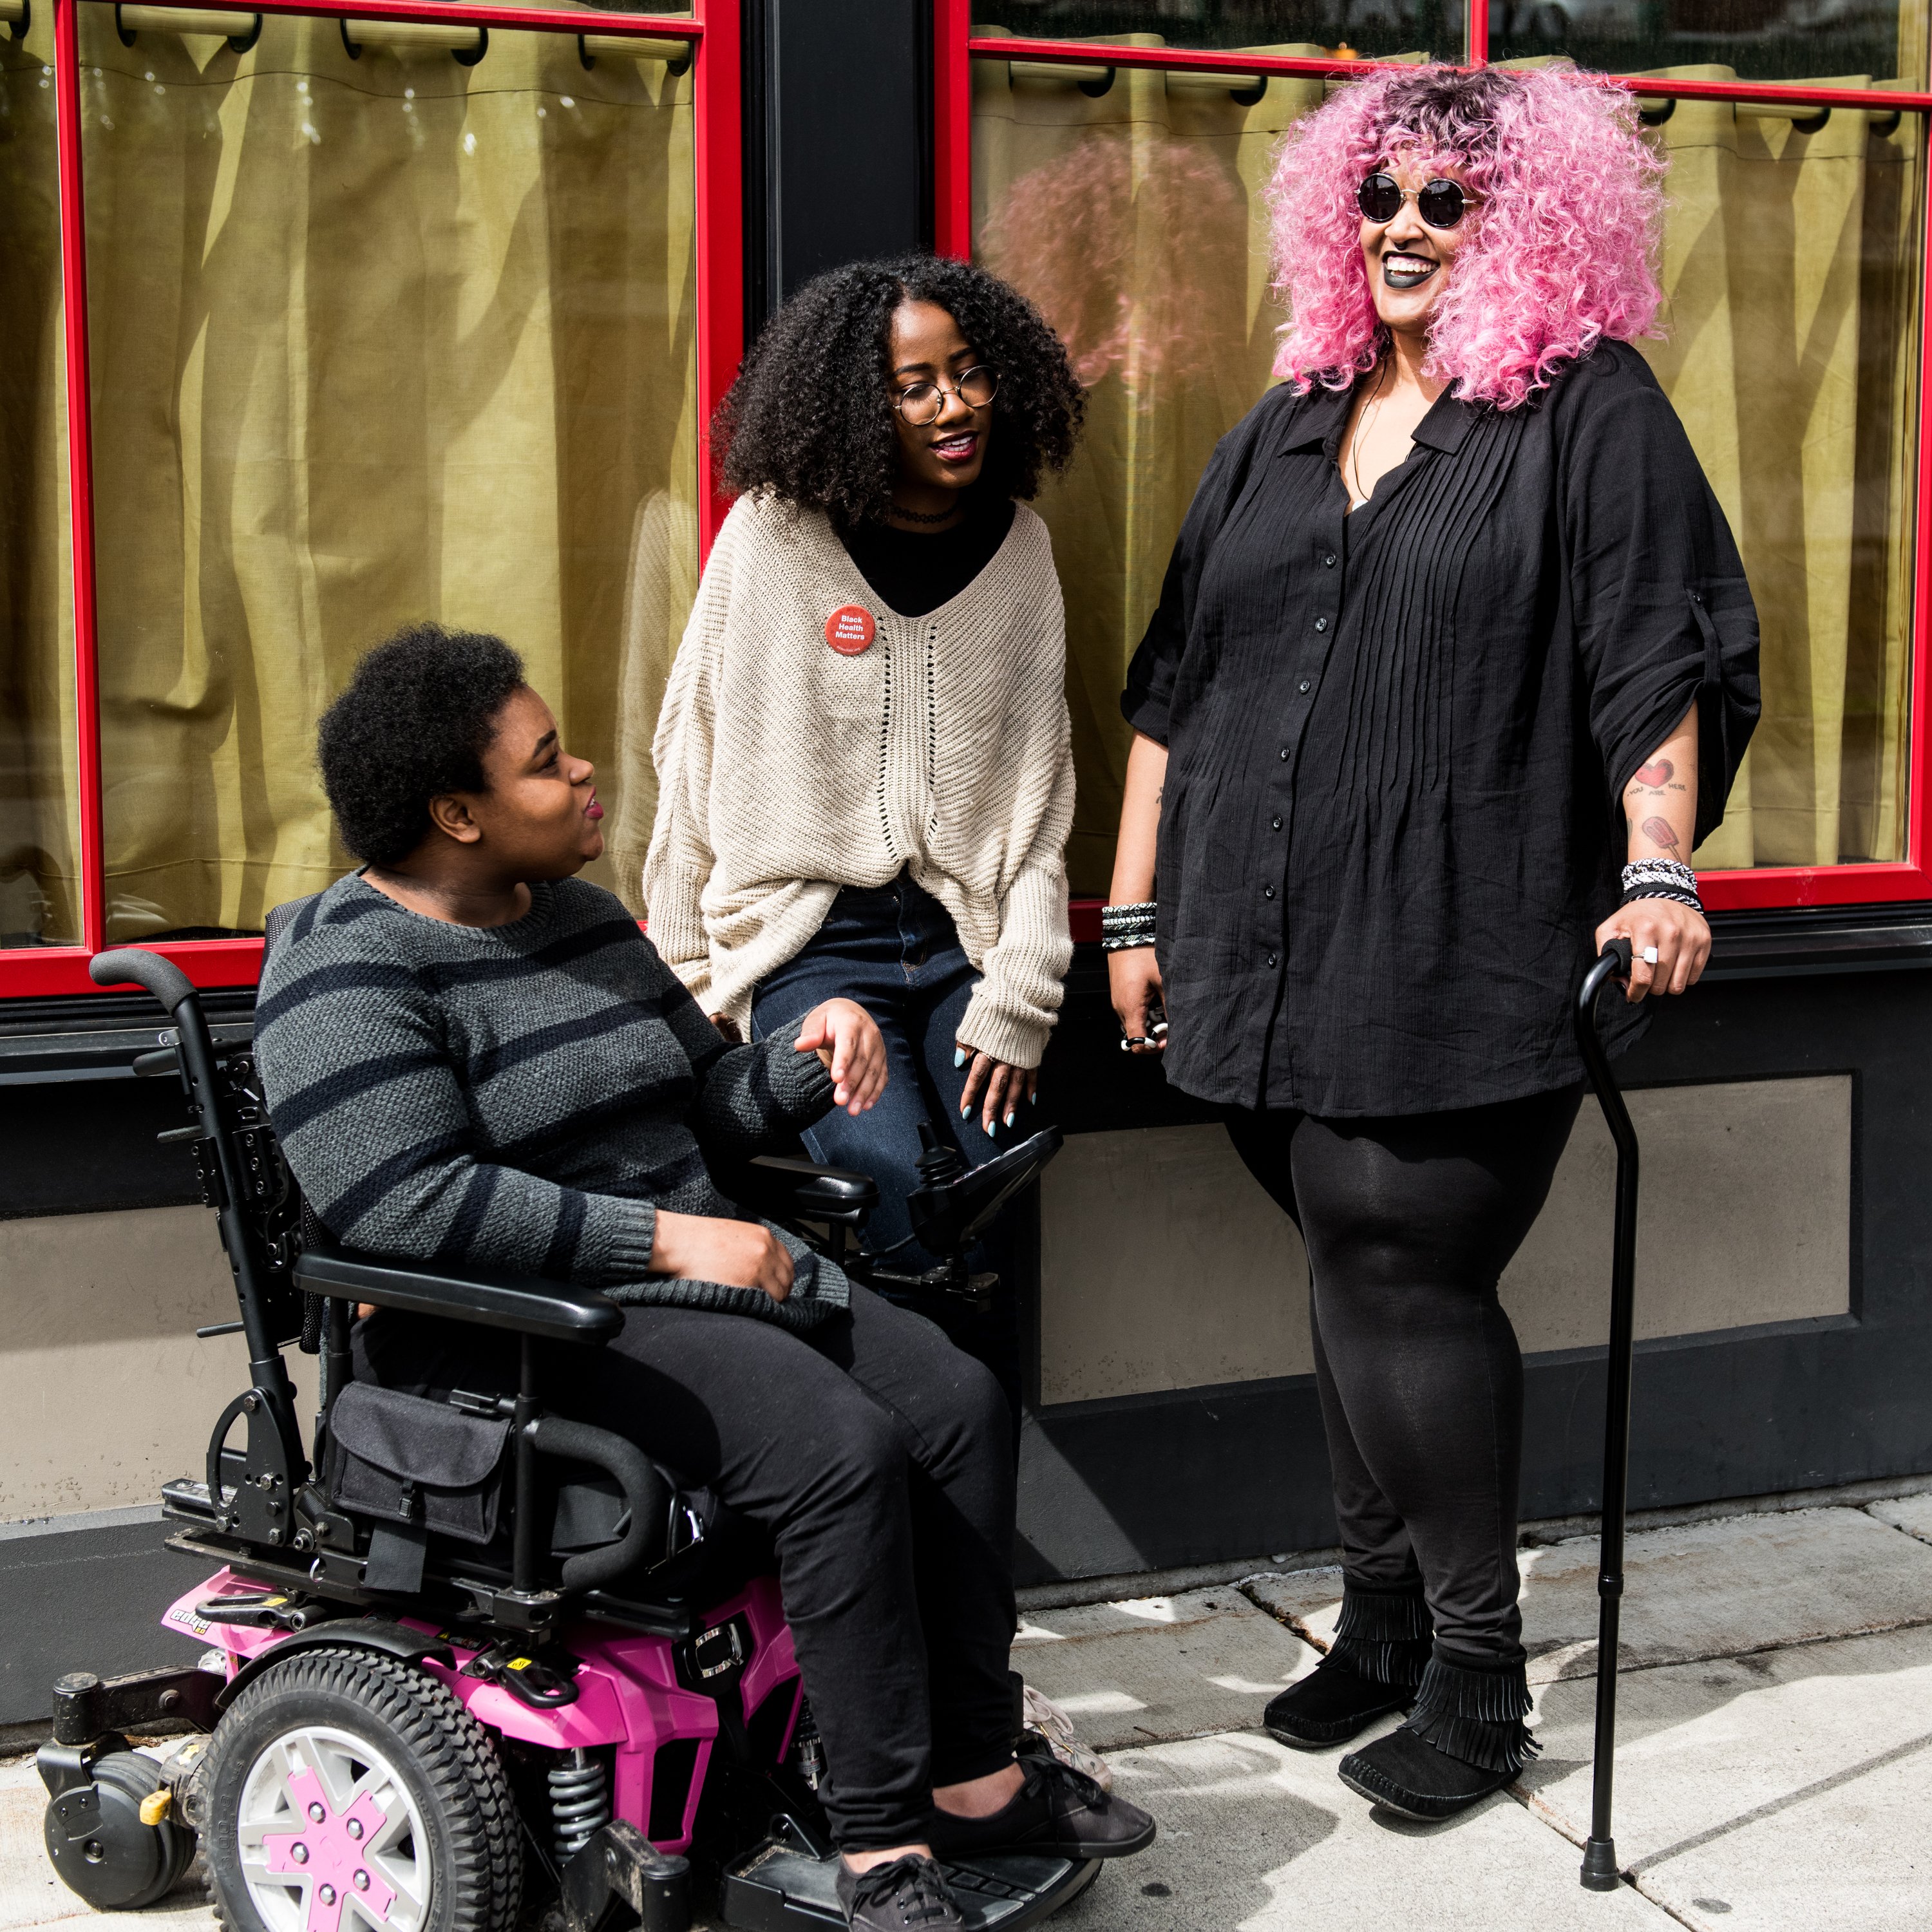 Three Black and disabled folx (a non-binary person in a power wheelchair, a femme leaning against a wall, and a non-binary person standing with a cane) engaged in converation. All three are outdoors and in front of a building with two large windows.